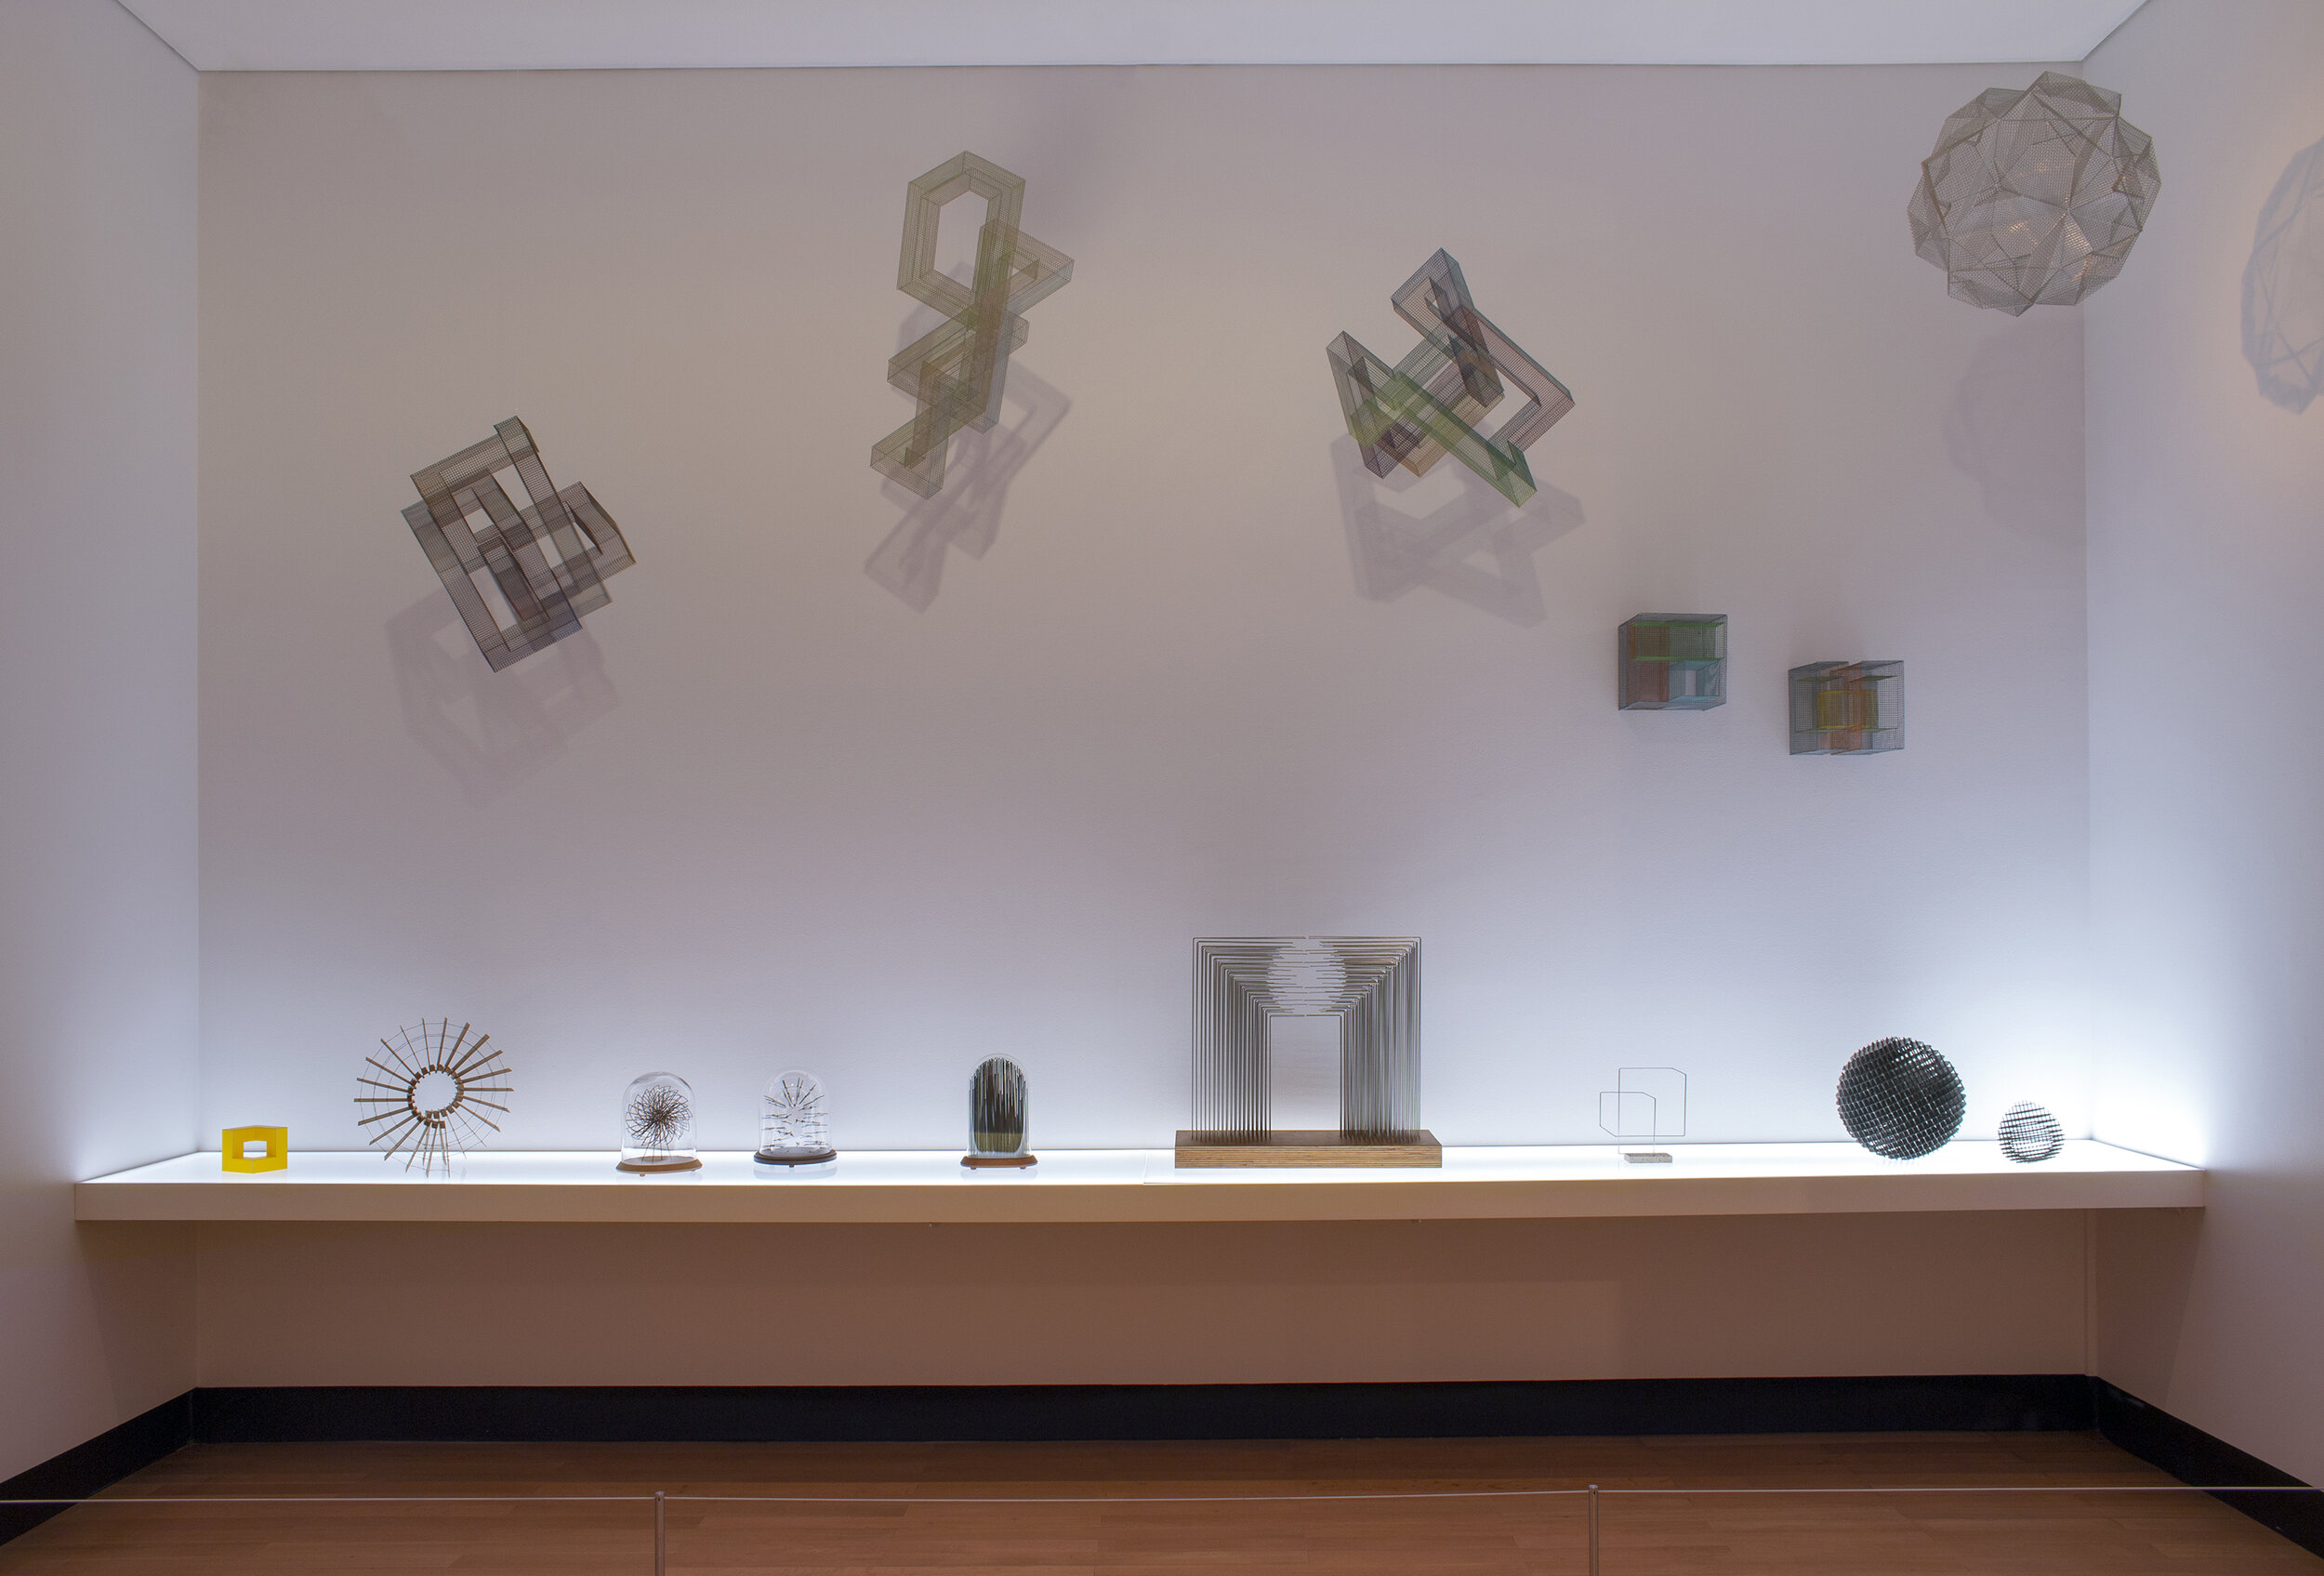   Lincoln Austin: The Space Between Us , exhibition installation view, Ipswich Art Gallery, 2021; image courtesy Ipswich Art Gallery 